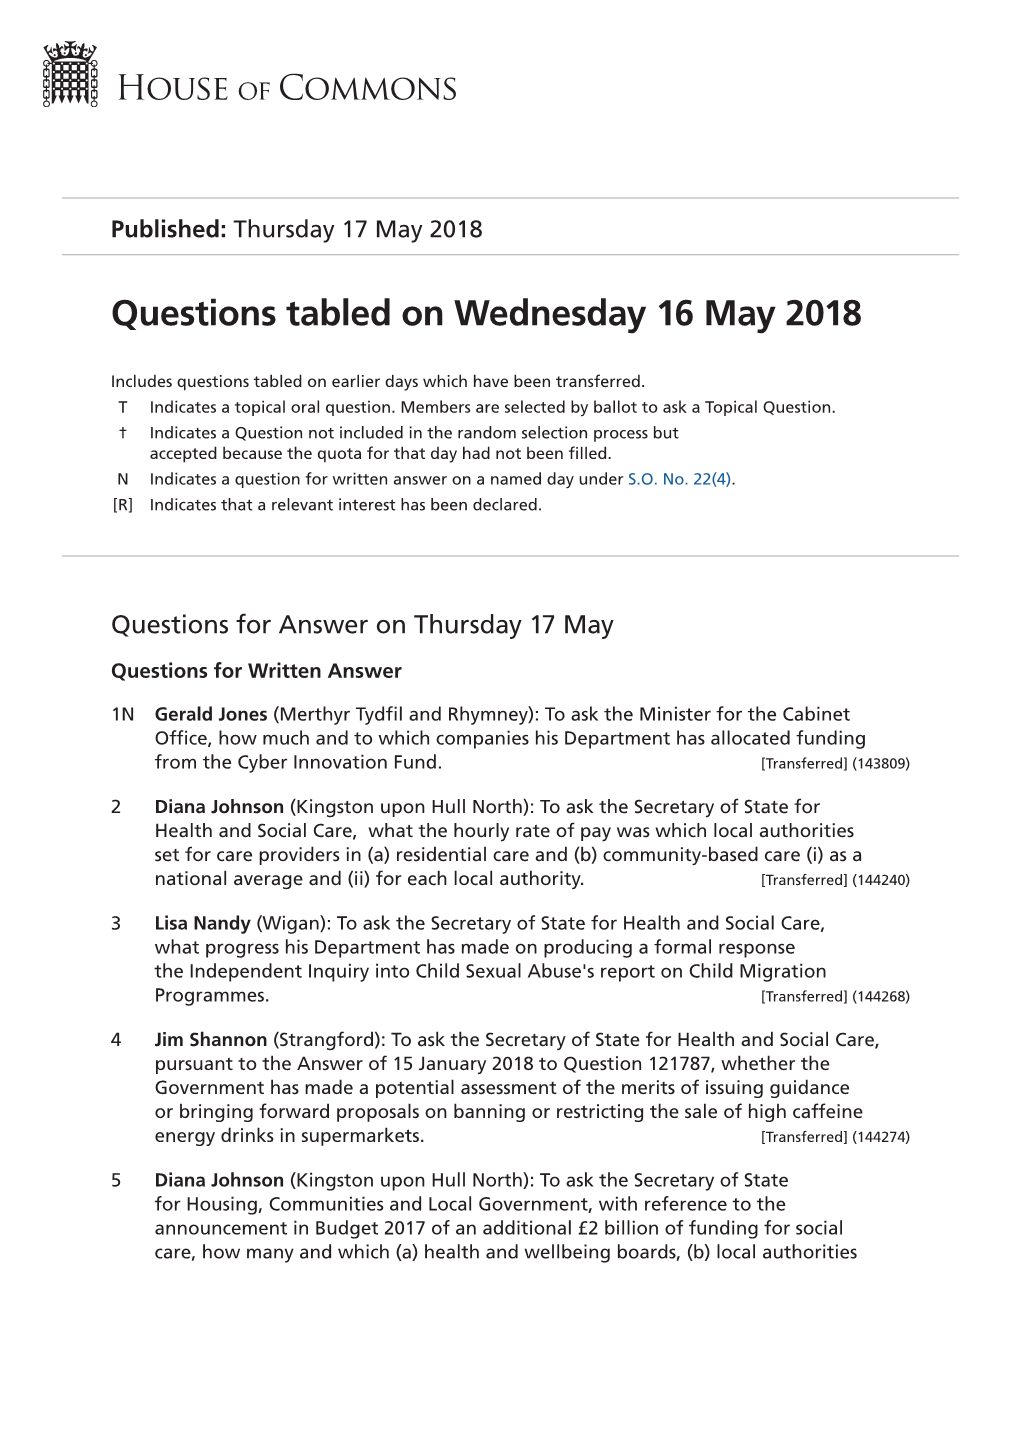 Questions Tabled on Wed 16 May 2018